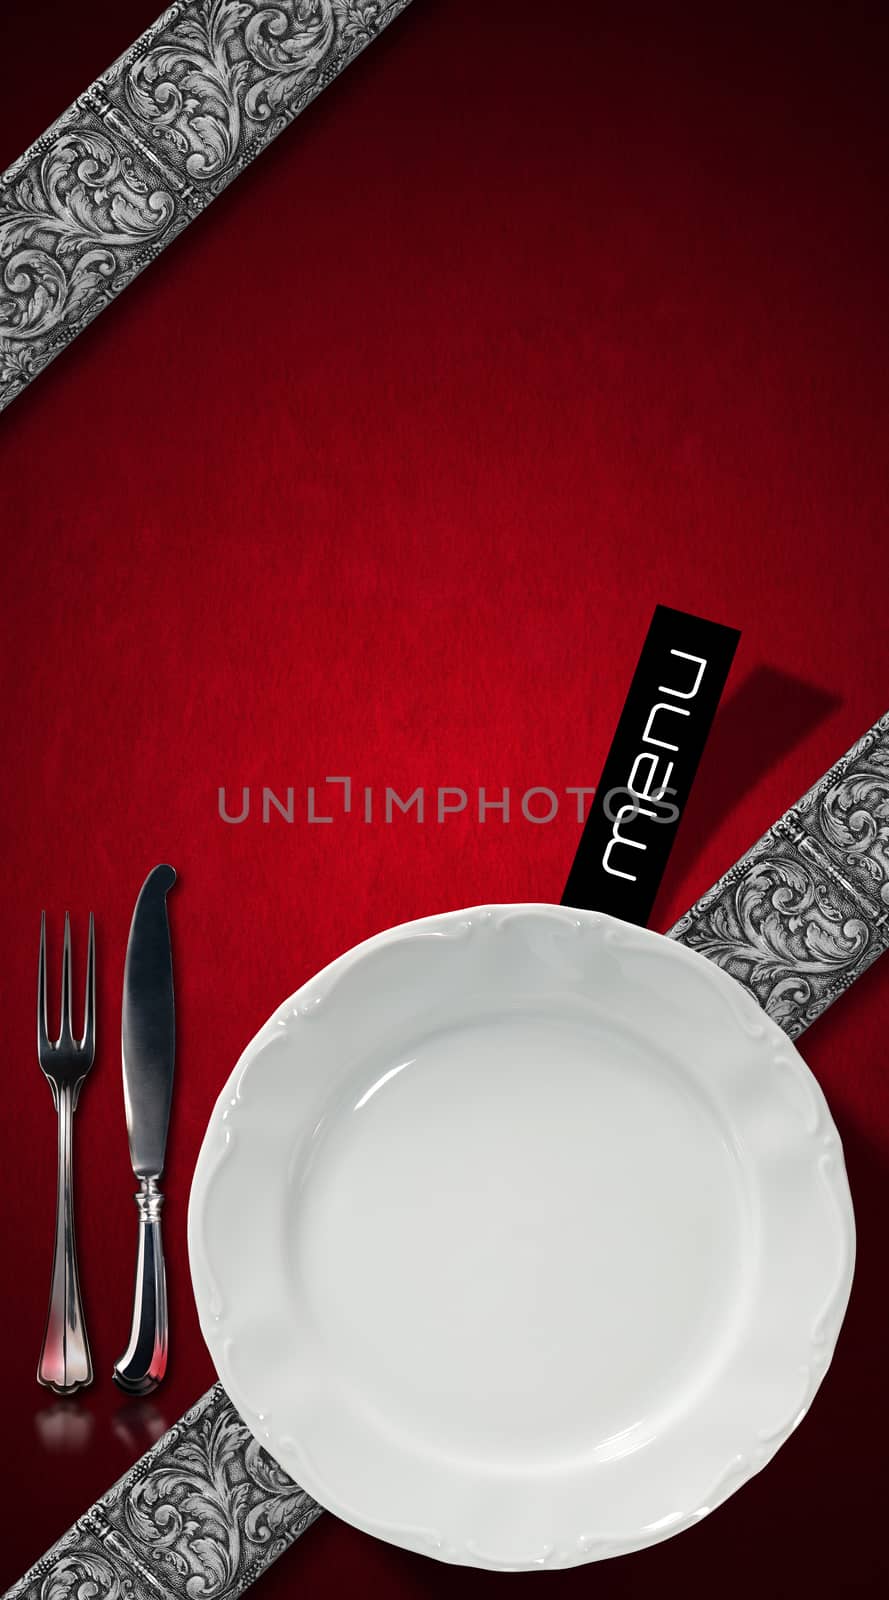 Red velvet background with diagonal silver floral bands, empty white plate and silver cutlery. Template for an elegant restaurant menu